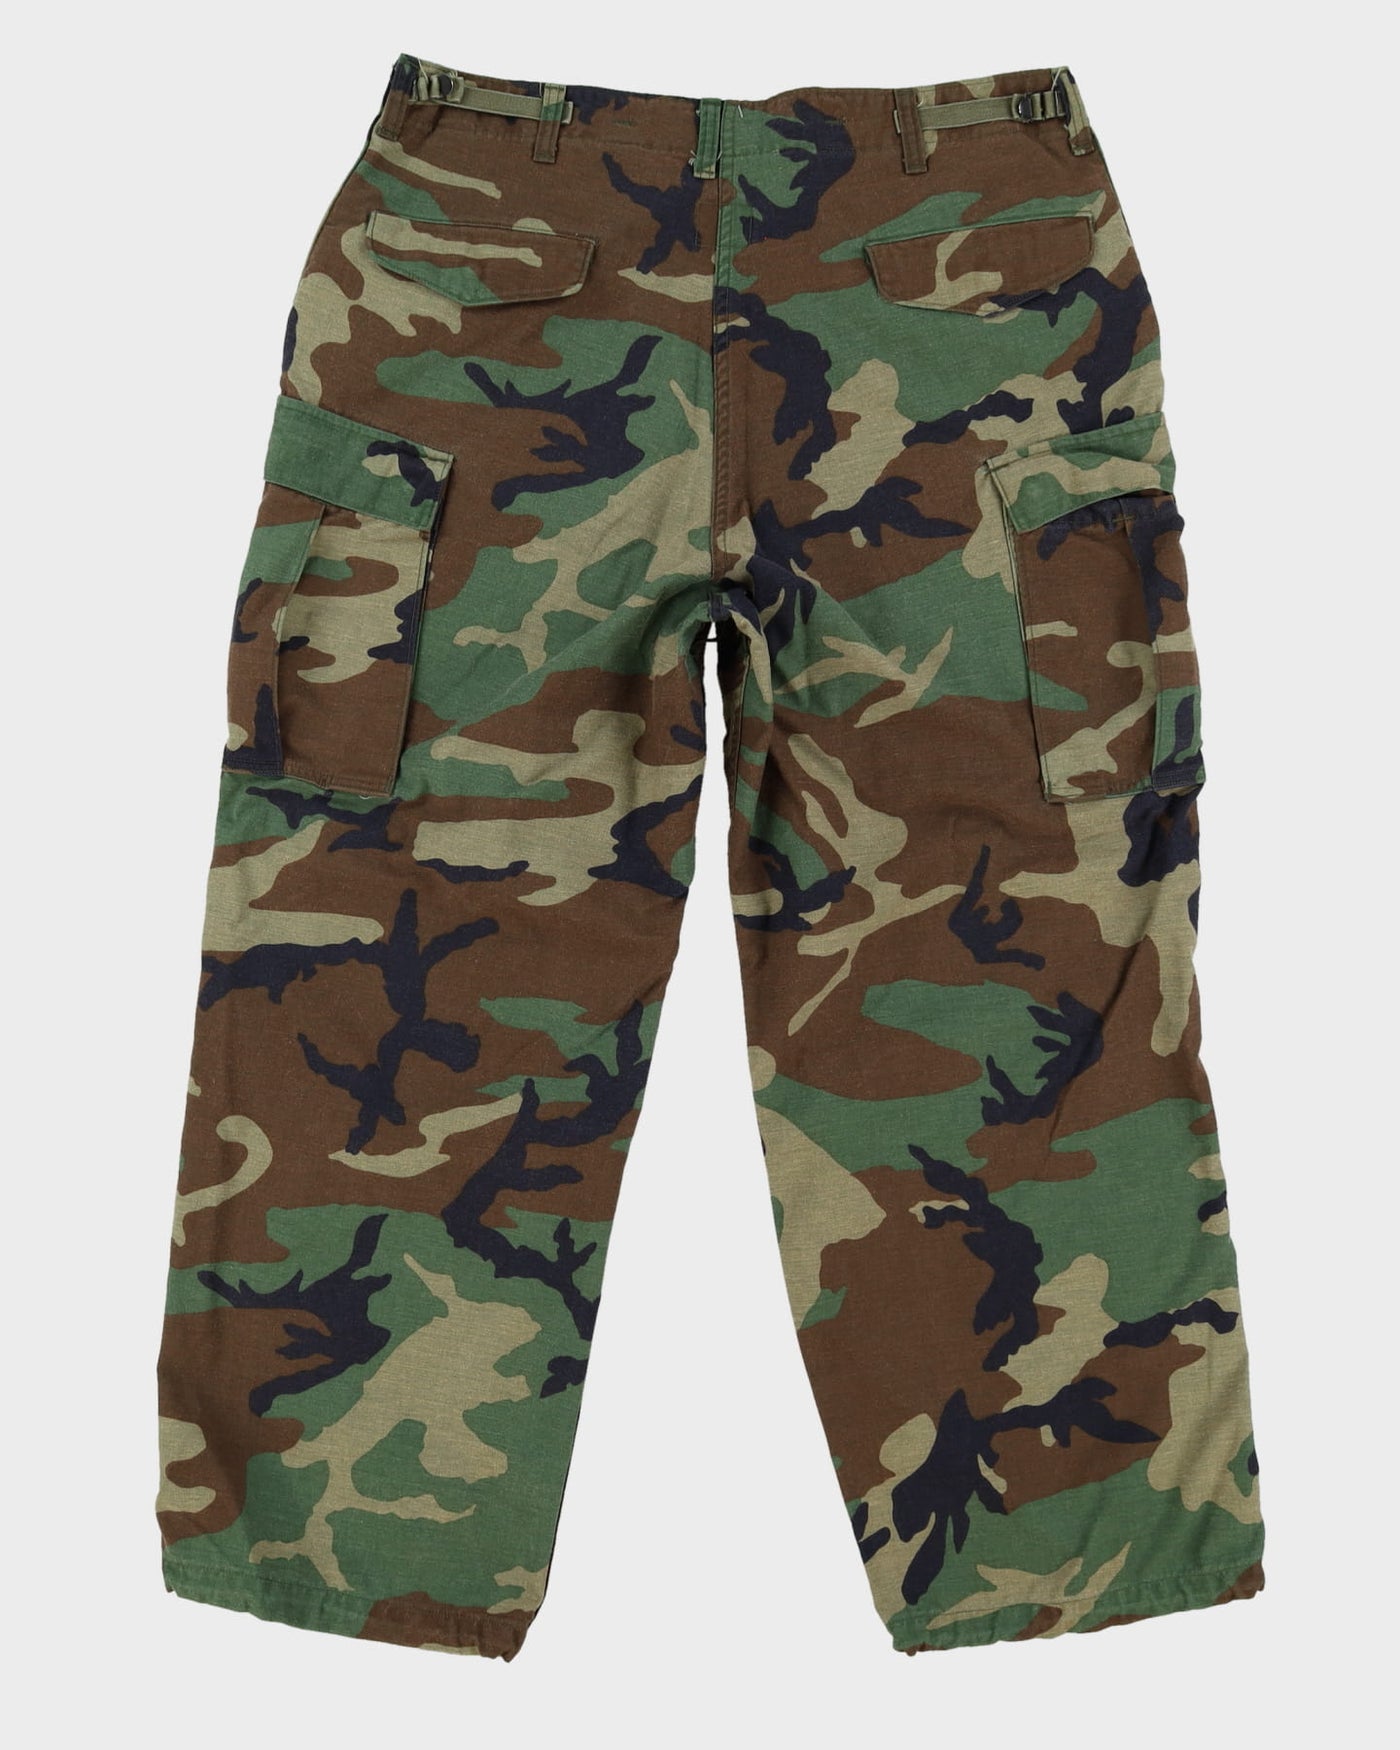 90s Vintage US Military Cold Weather Woodland Camo Trousers - 38x30